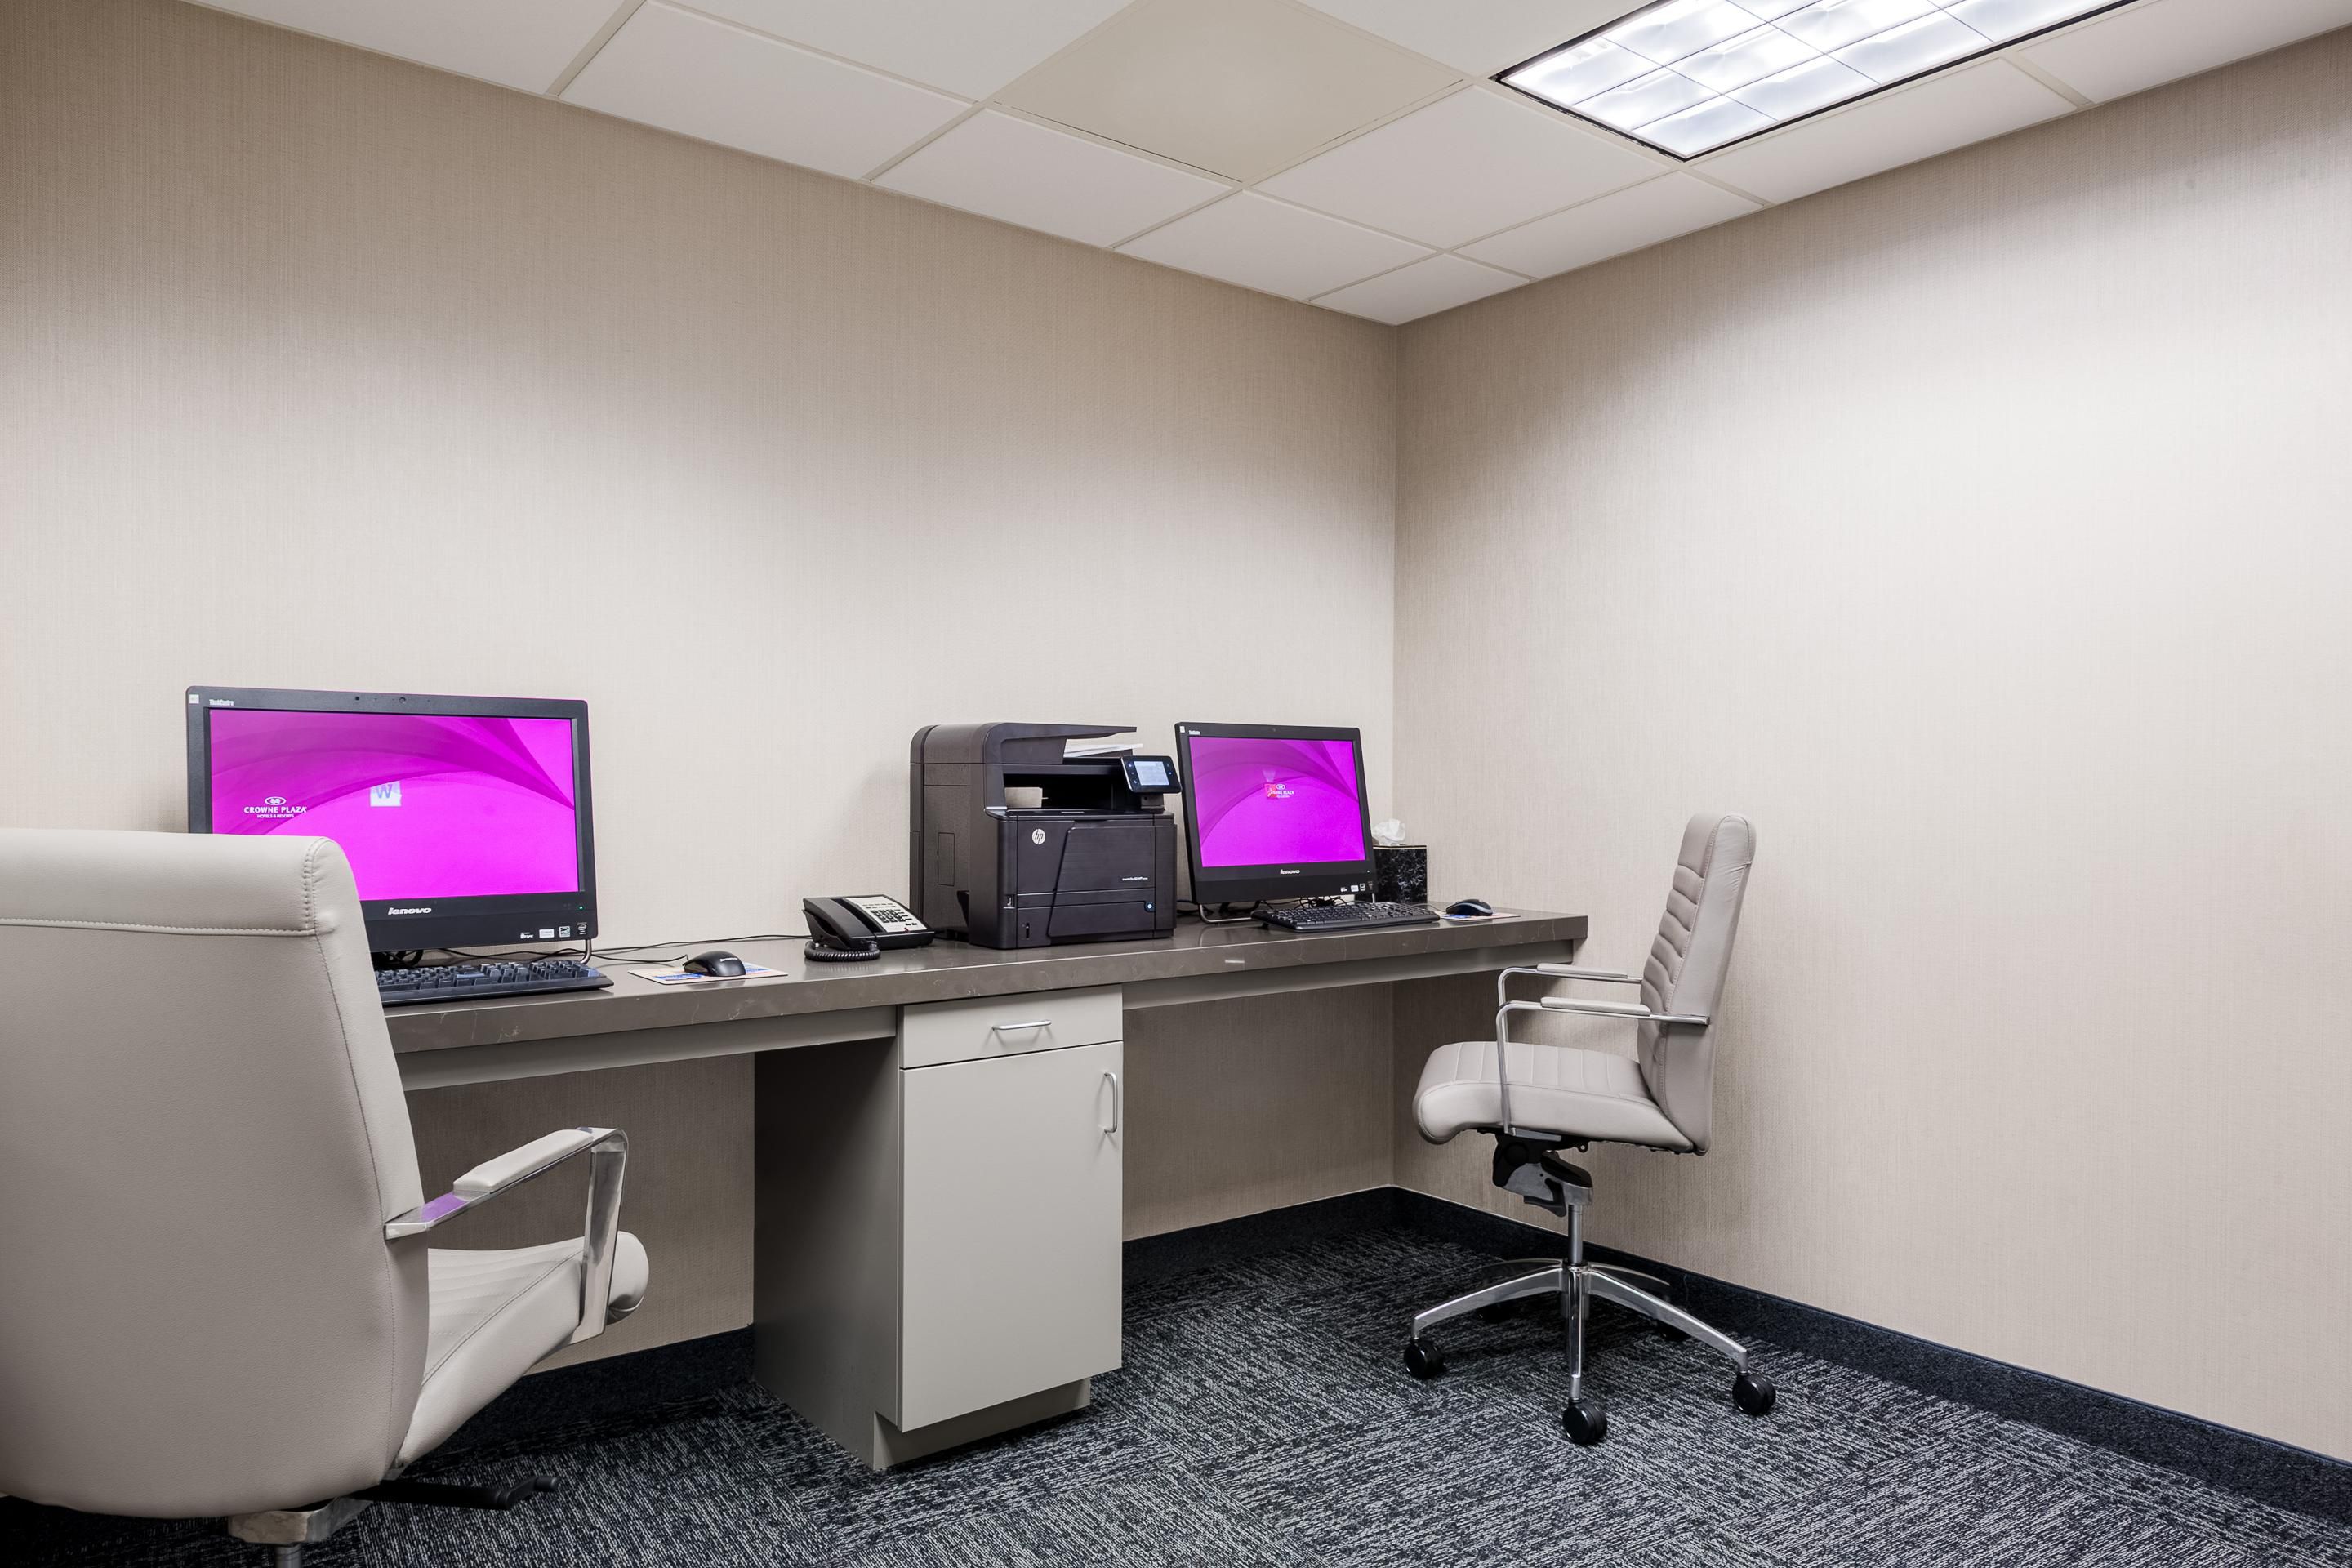 Stay connected with computers and more in our new business center